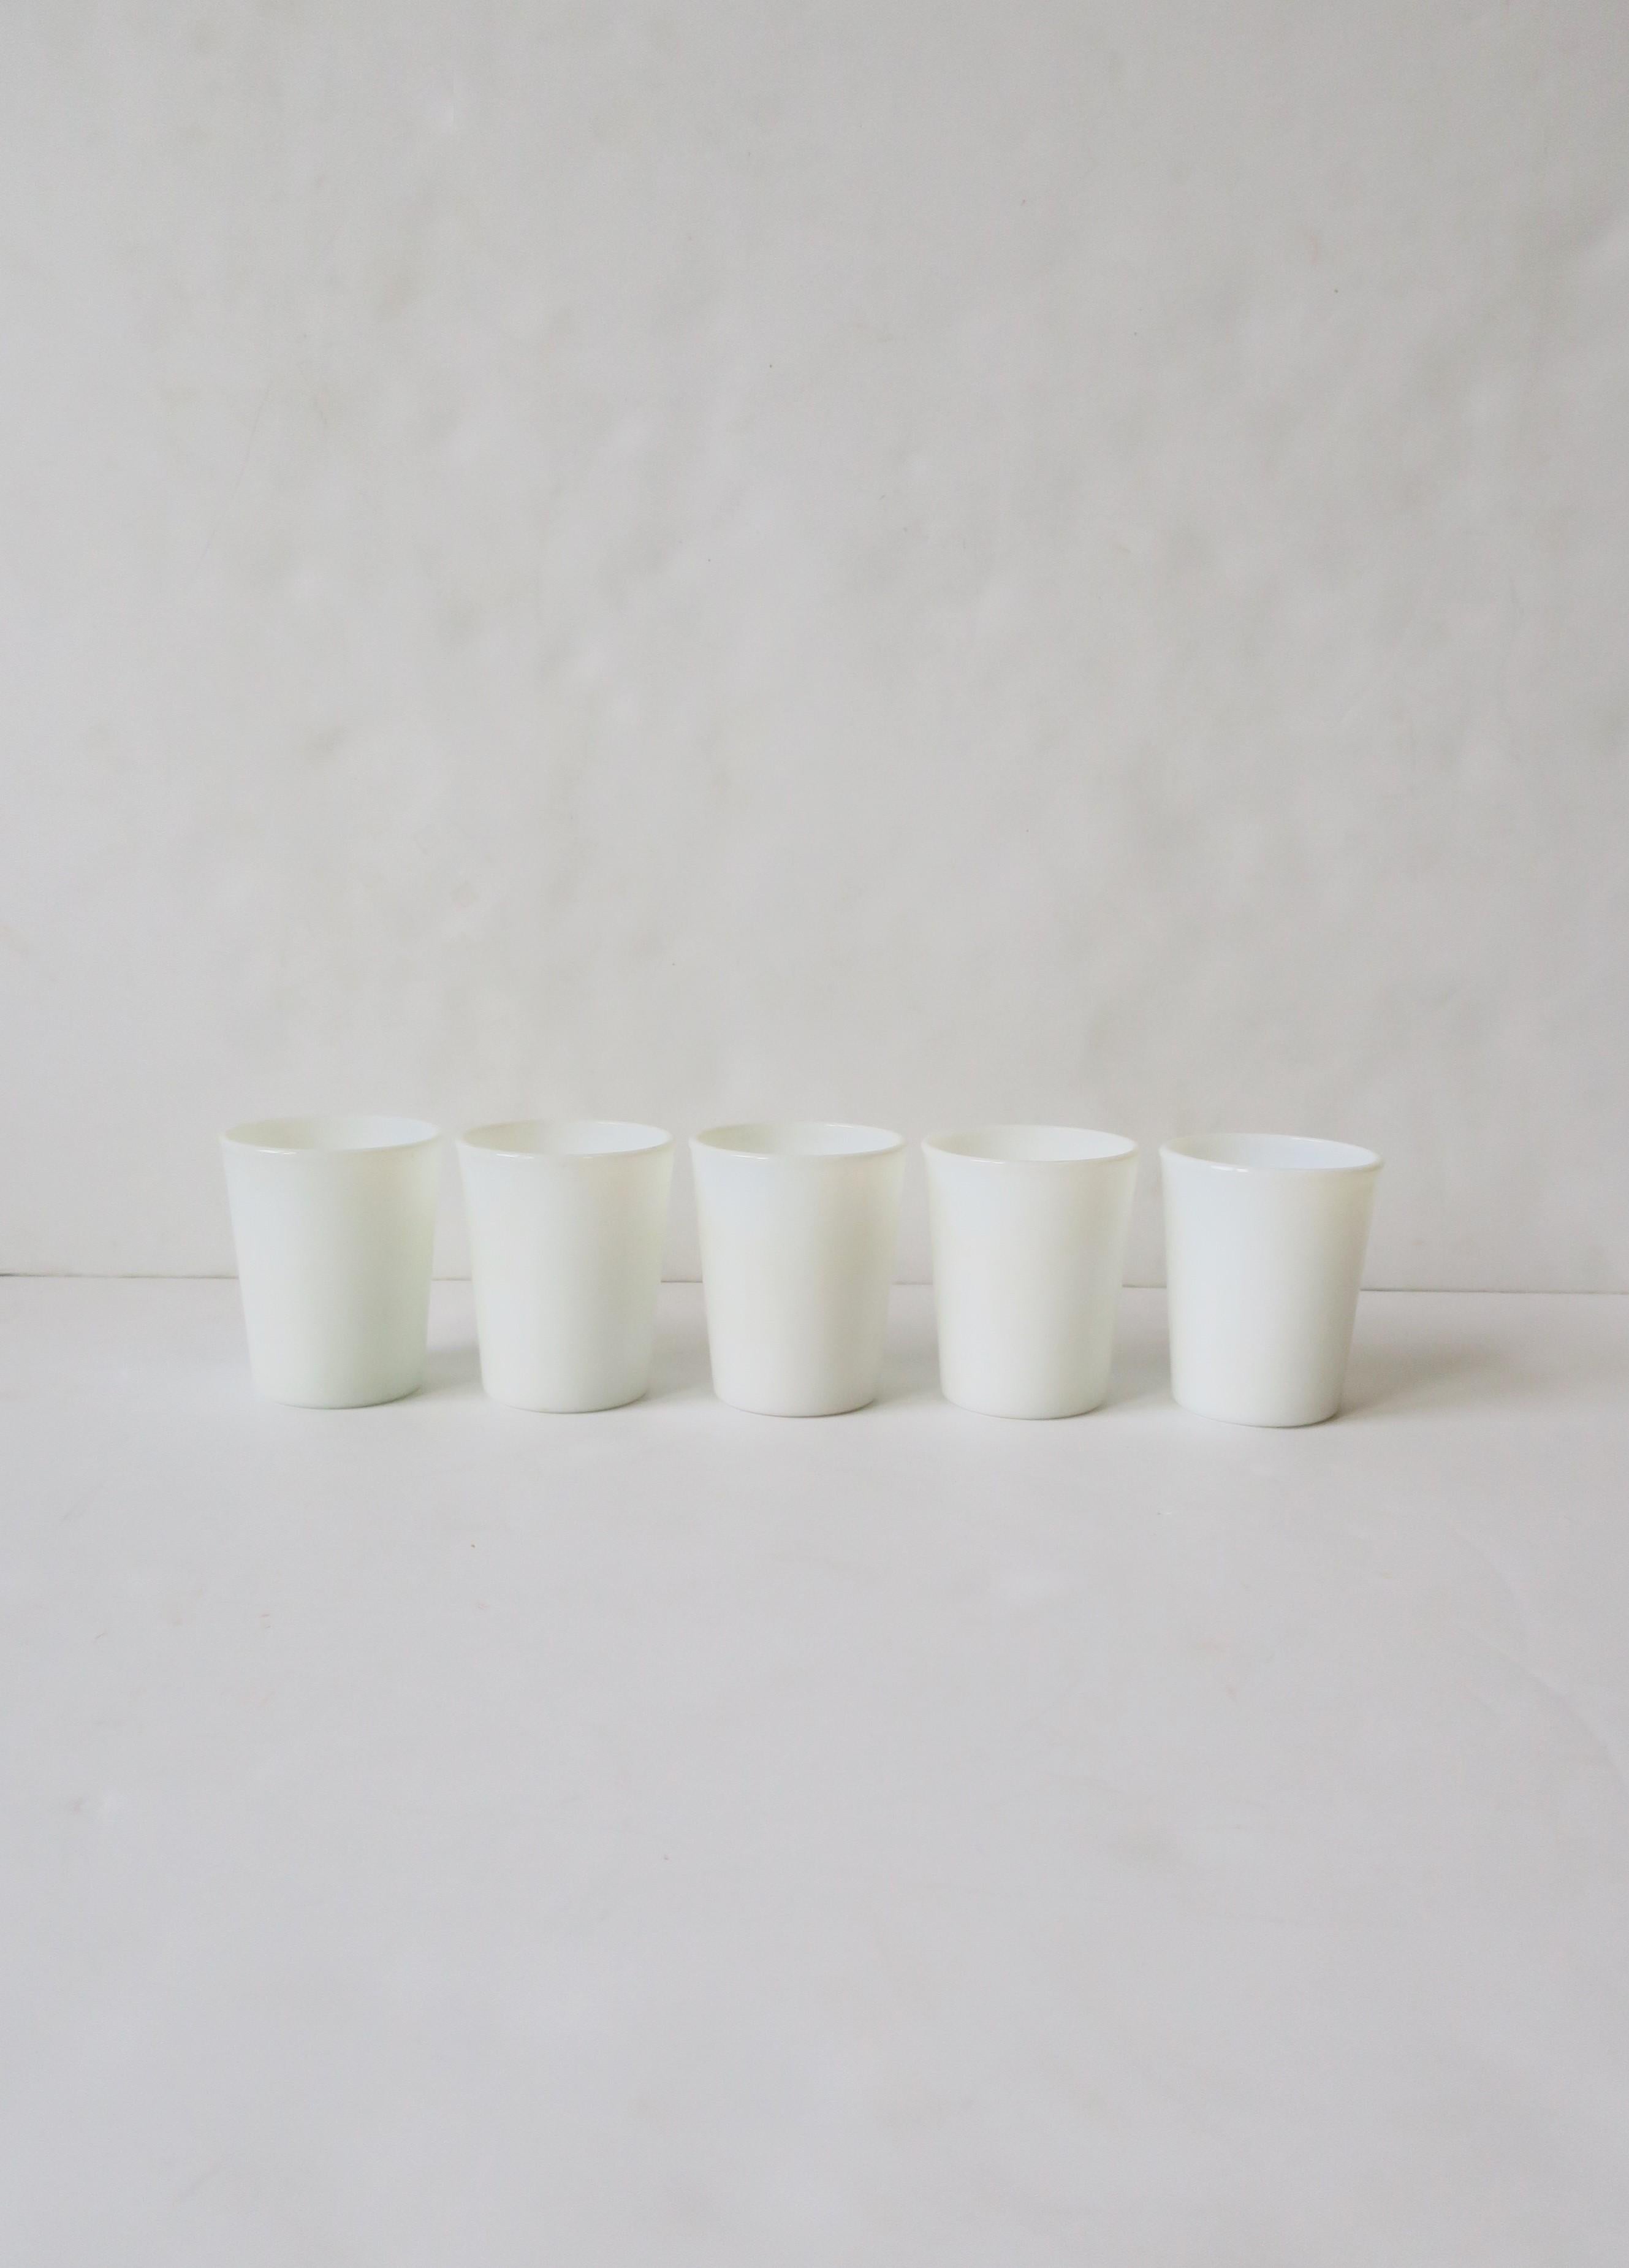 White Milk Glass Cocktail Tumbler Glasses, Set of 5, Early 20th Century 1